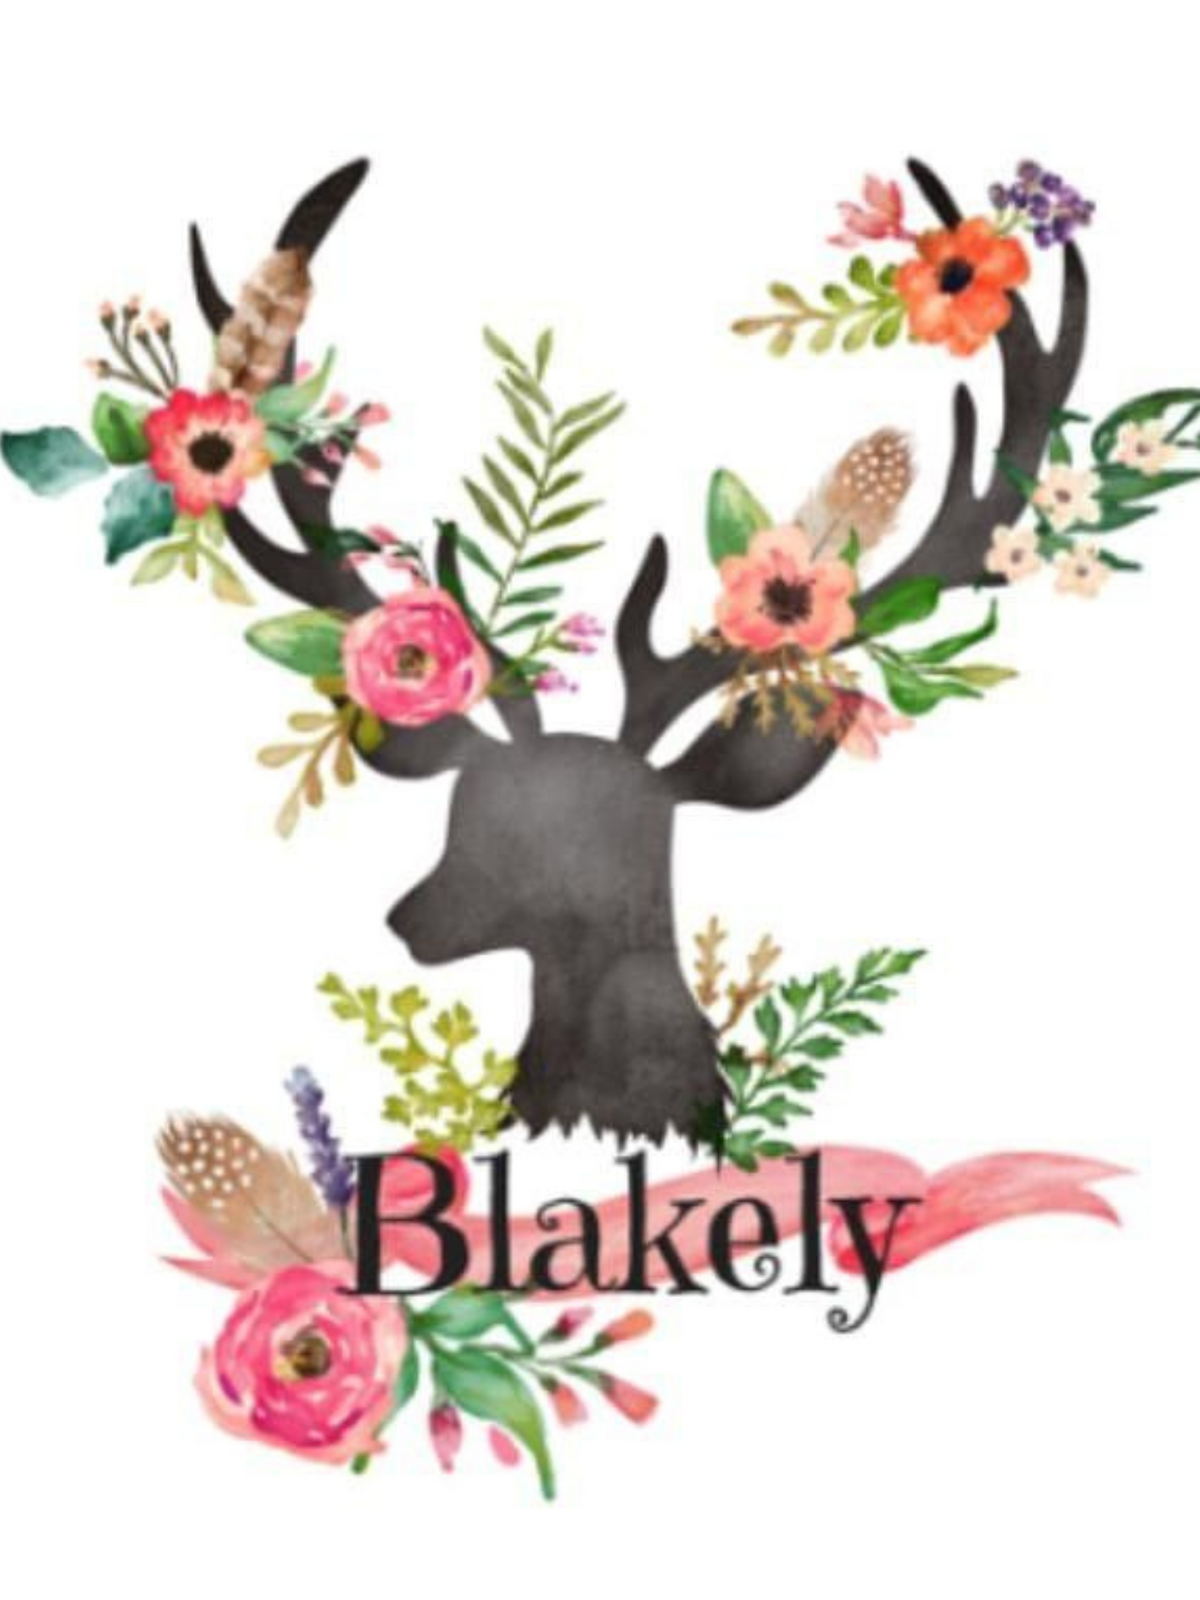 Standard blanket - Personalized Floral Deer Antlers and Fawn Minky Woodland Blanket - DBC Baby Bedding Co 